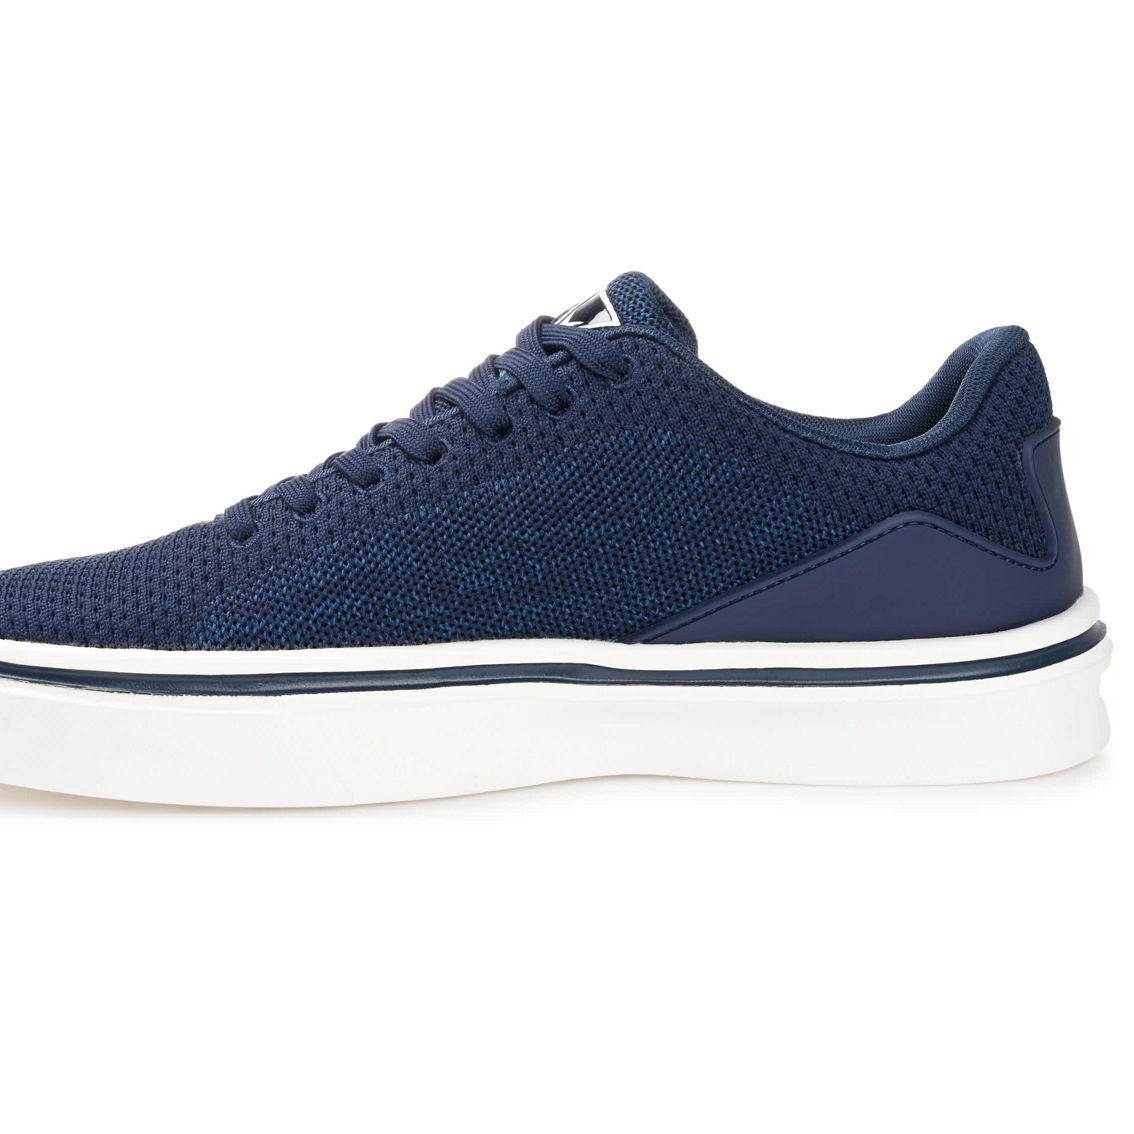 Vance Co. Desean Knit Casual Sneaker - Image 2 of 5